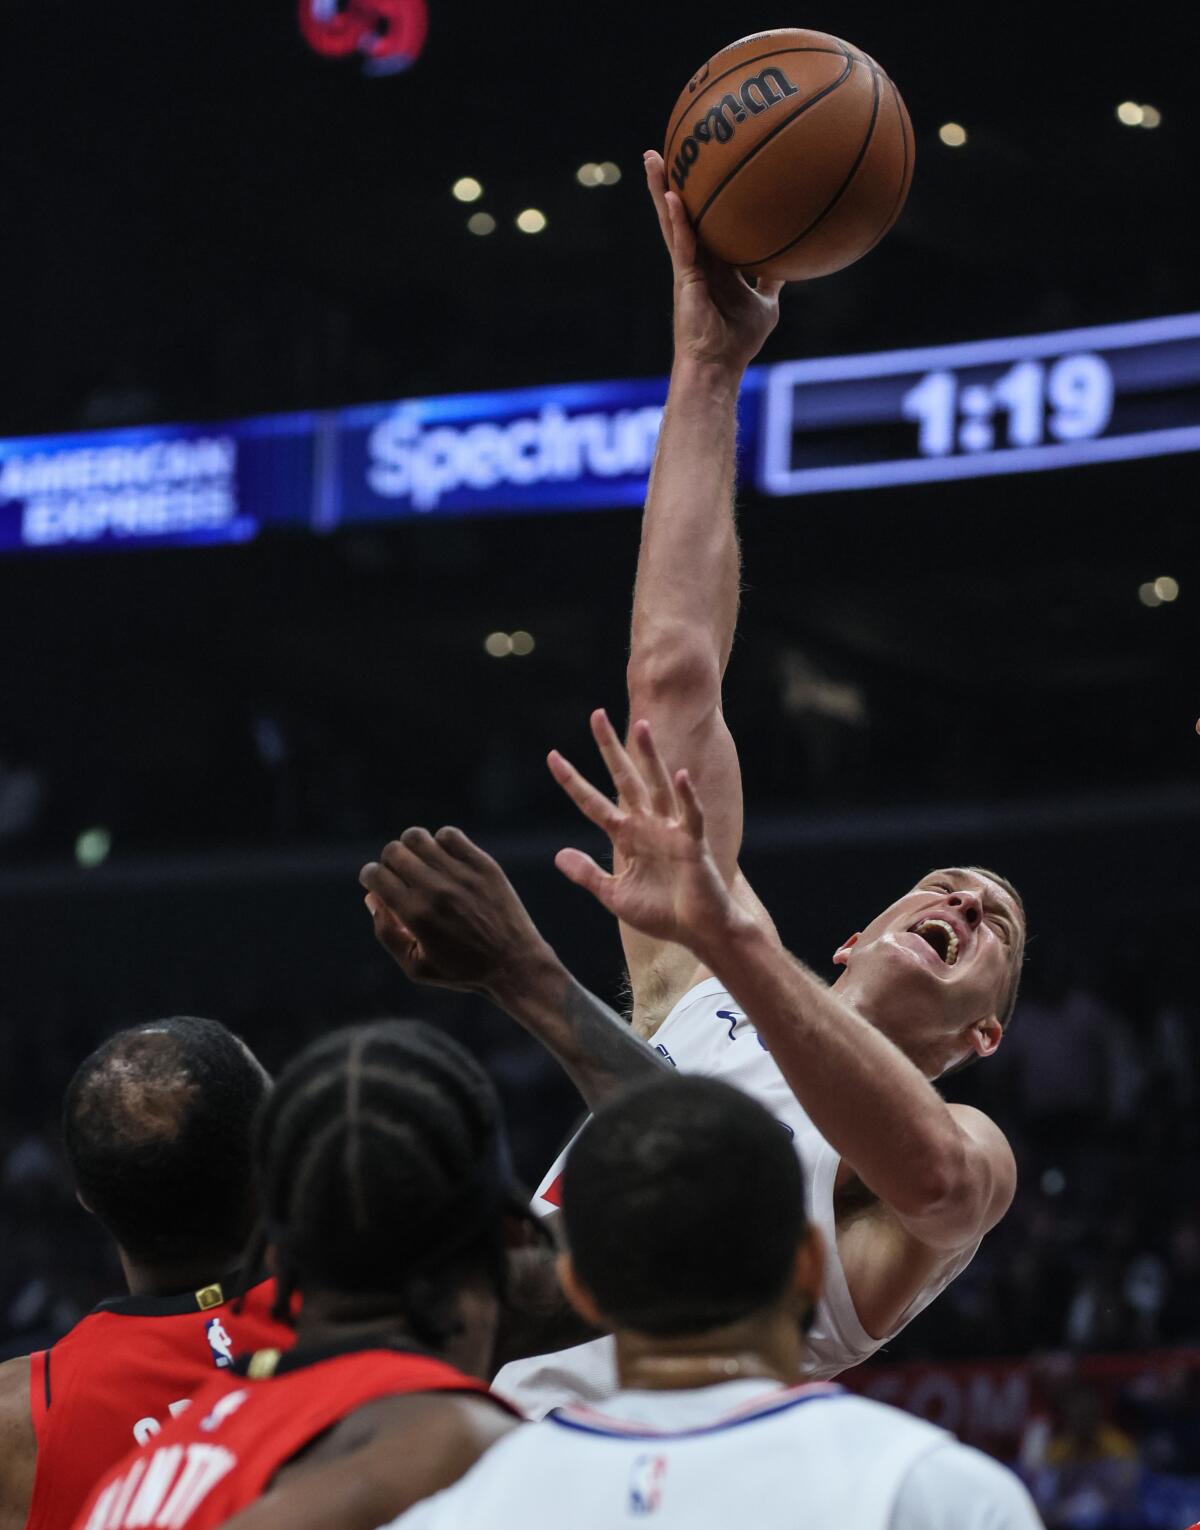 Clippers center Mason Plumlee elevates above Rockets defenders for a close-range shot Sunday.